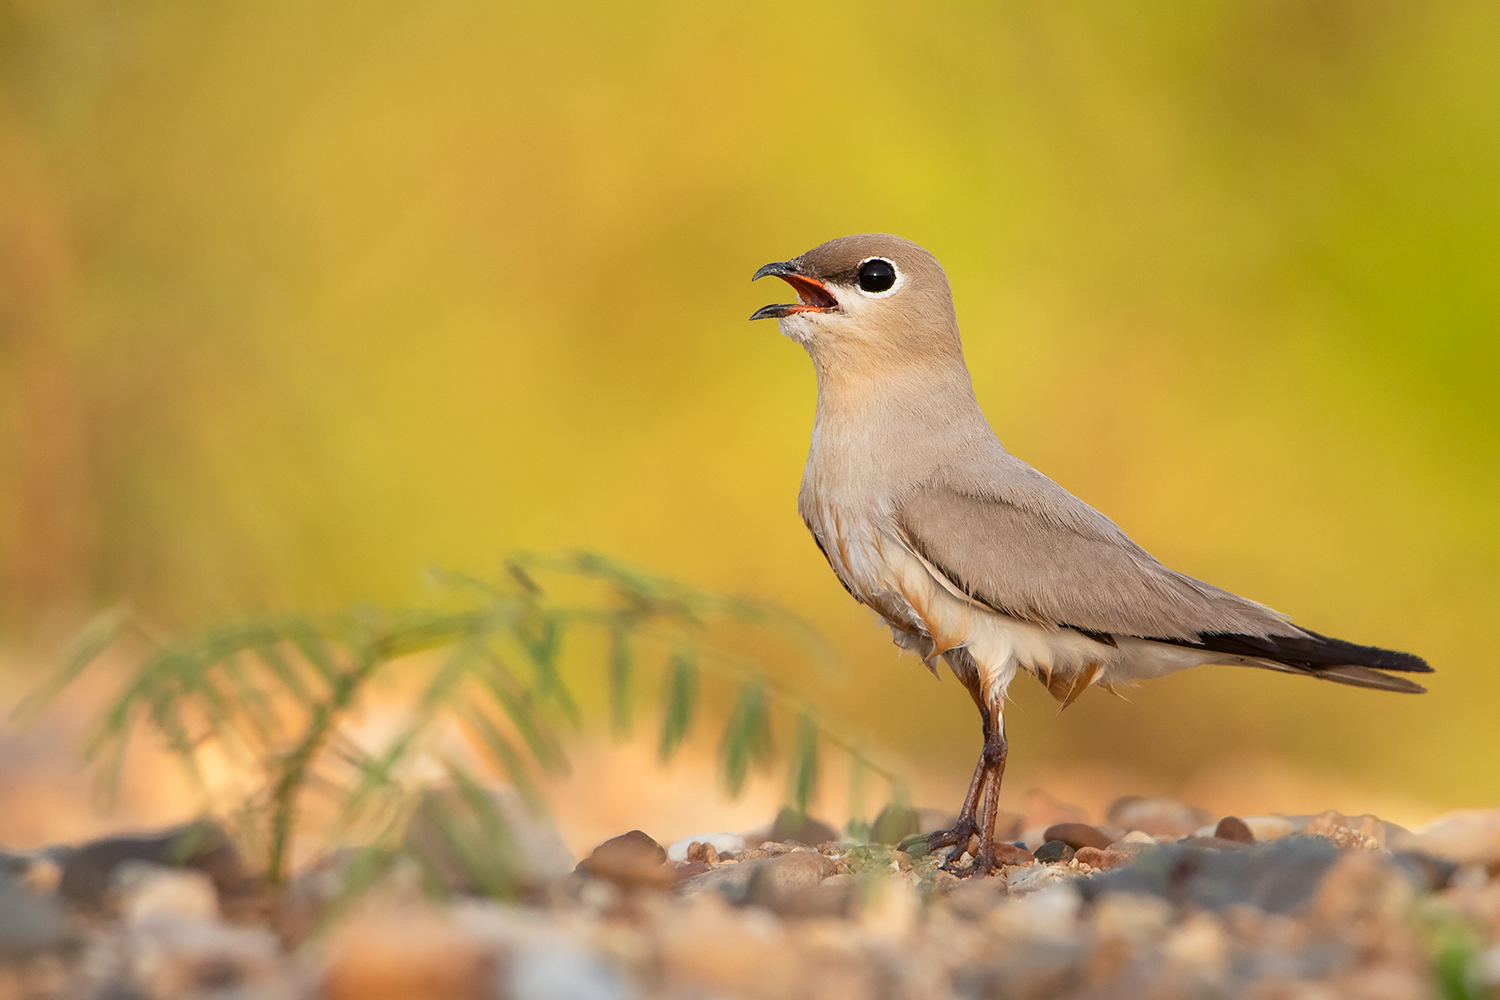 <p>There may be fewer than 1,000 pairs of small pratincoles along Thai stretches of the Mekong (Image: Ayuwat Jearwattanakanok)</p>